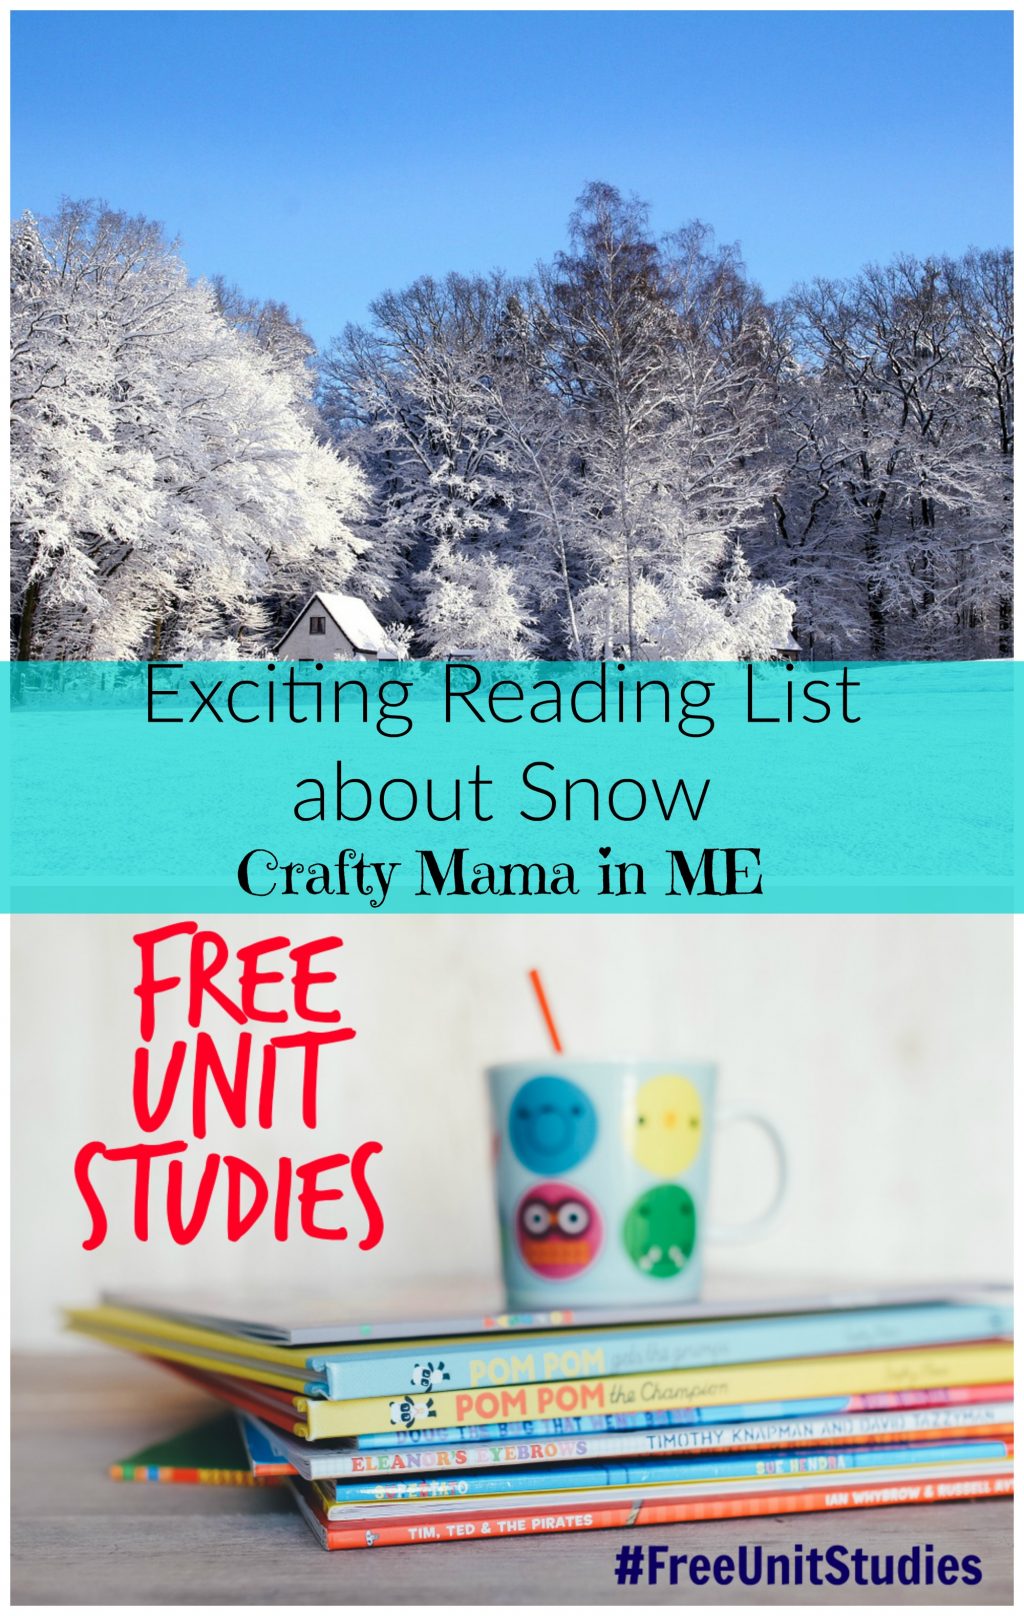 Exciting Children's Reading List about Snow